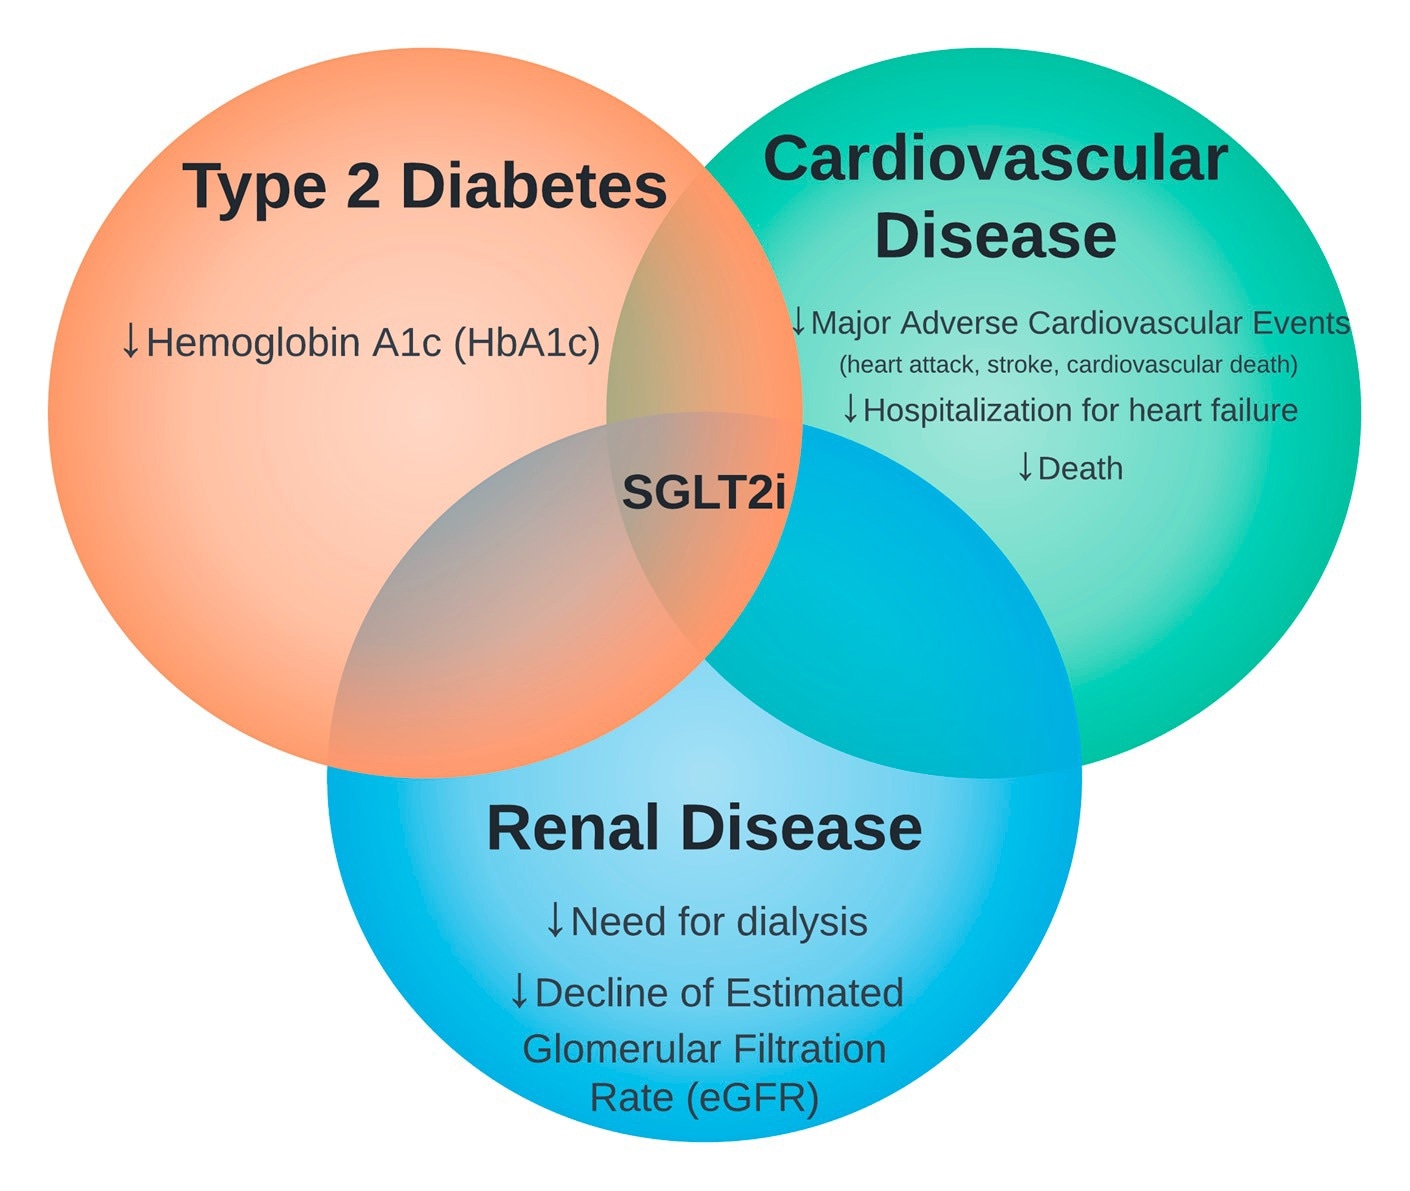 The intersection of sodium-glucose cotransporter 2 inhibitors (SGLT2i) therapy in type 2 diabetes, cardiovascular disease, and renal disease.